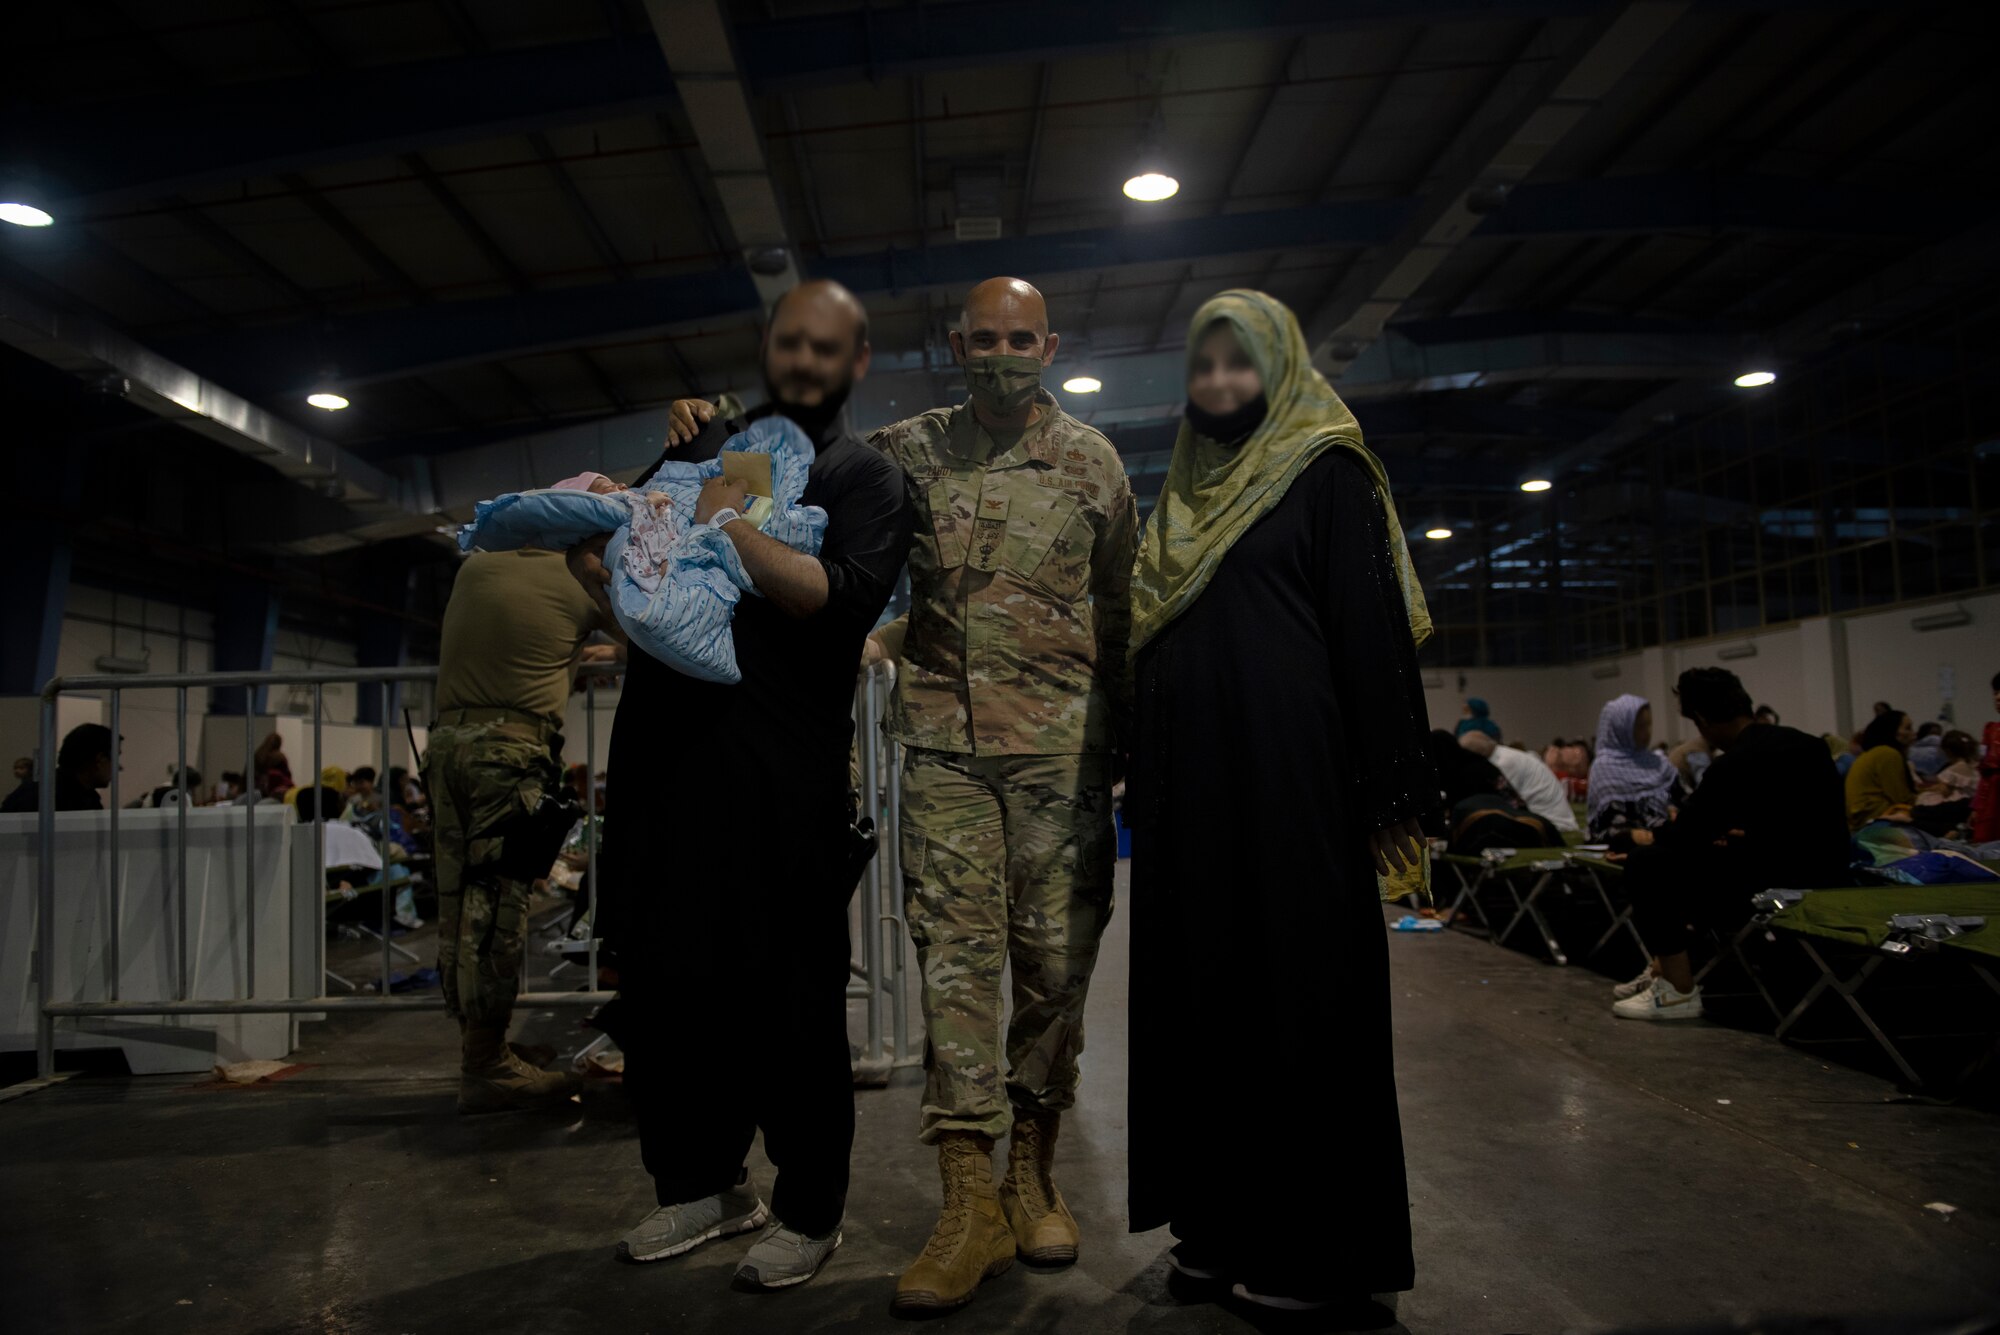 The HNCC operates as the link between Department of Defense personnel and the base’s Qatari Emiri Air Force counterparts. During the evacuation of Afghanistan, the HNCC oversaw Qatari immigration processes, which was the final step in moving qualified evacuees to their next destination.